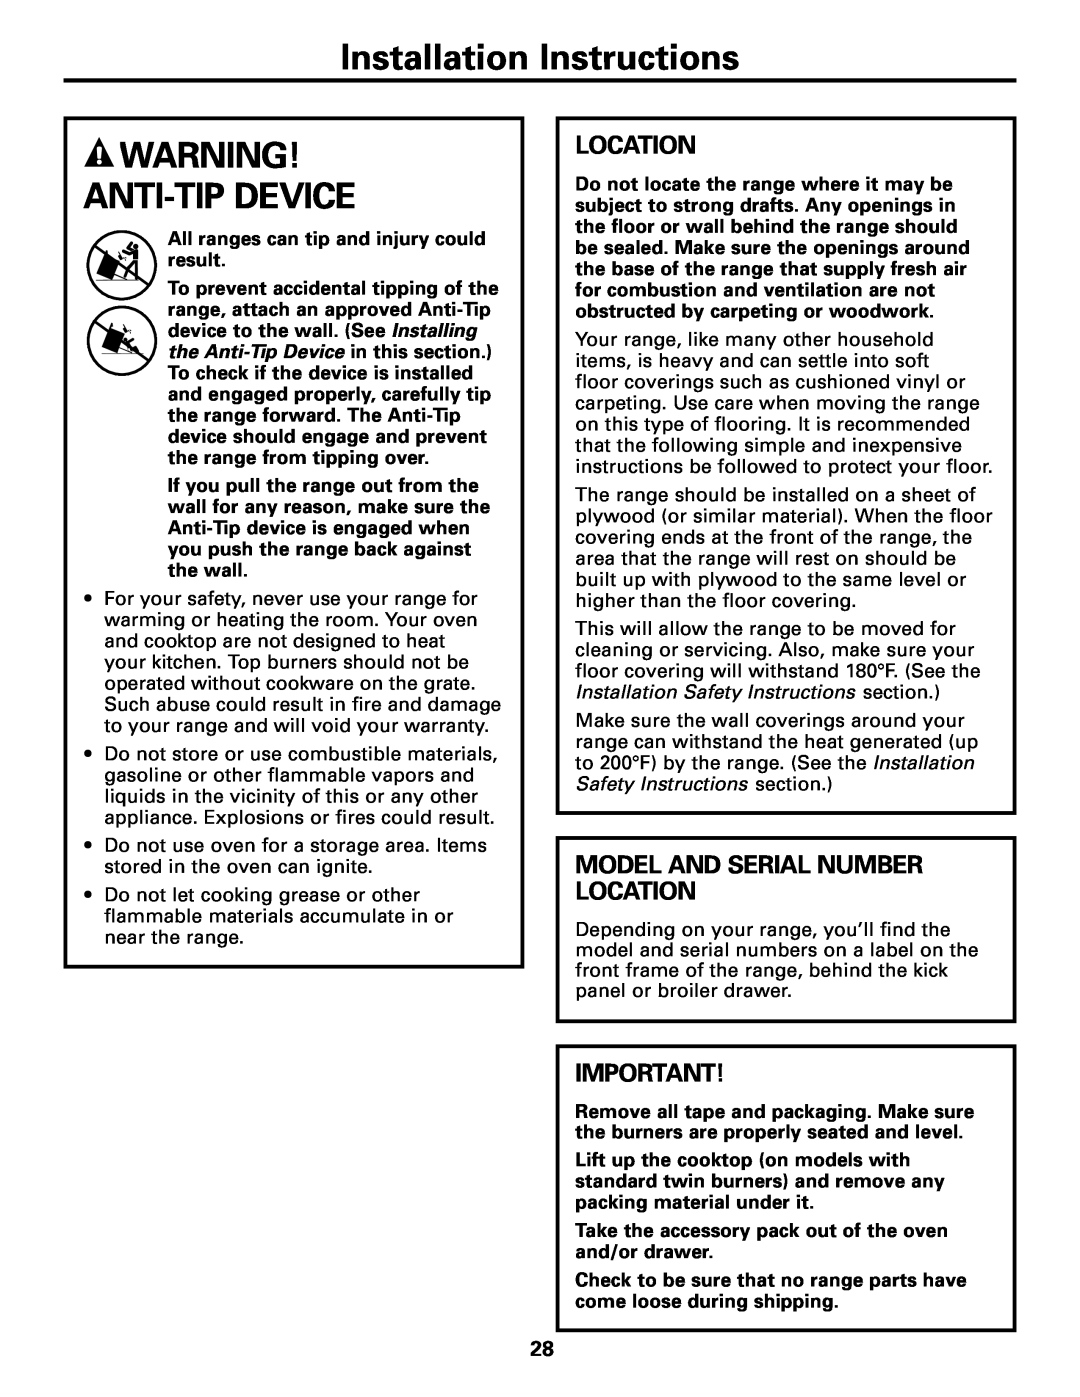 Americana Appliances AGBS300 Anti-Tip Device, Model And Serial Number Location, Installation Instructions 